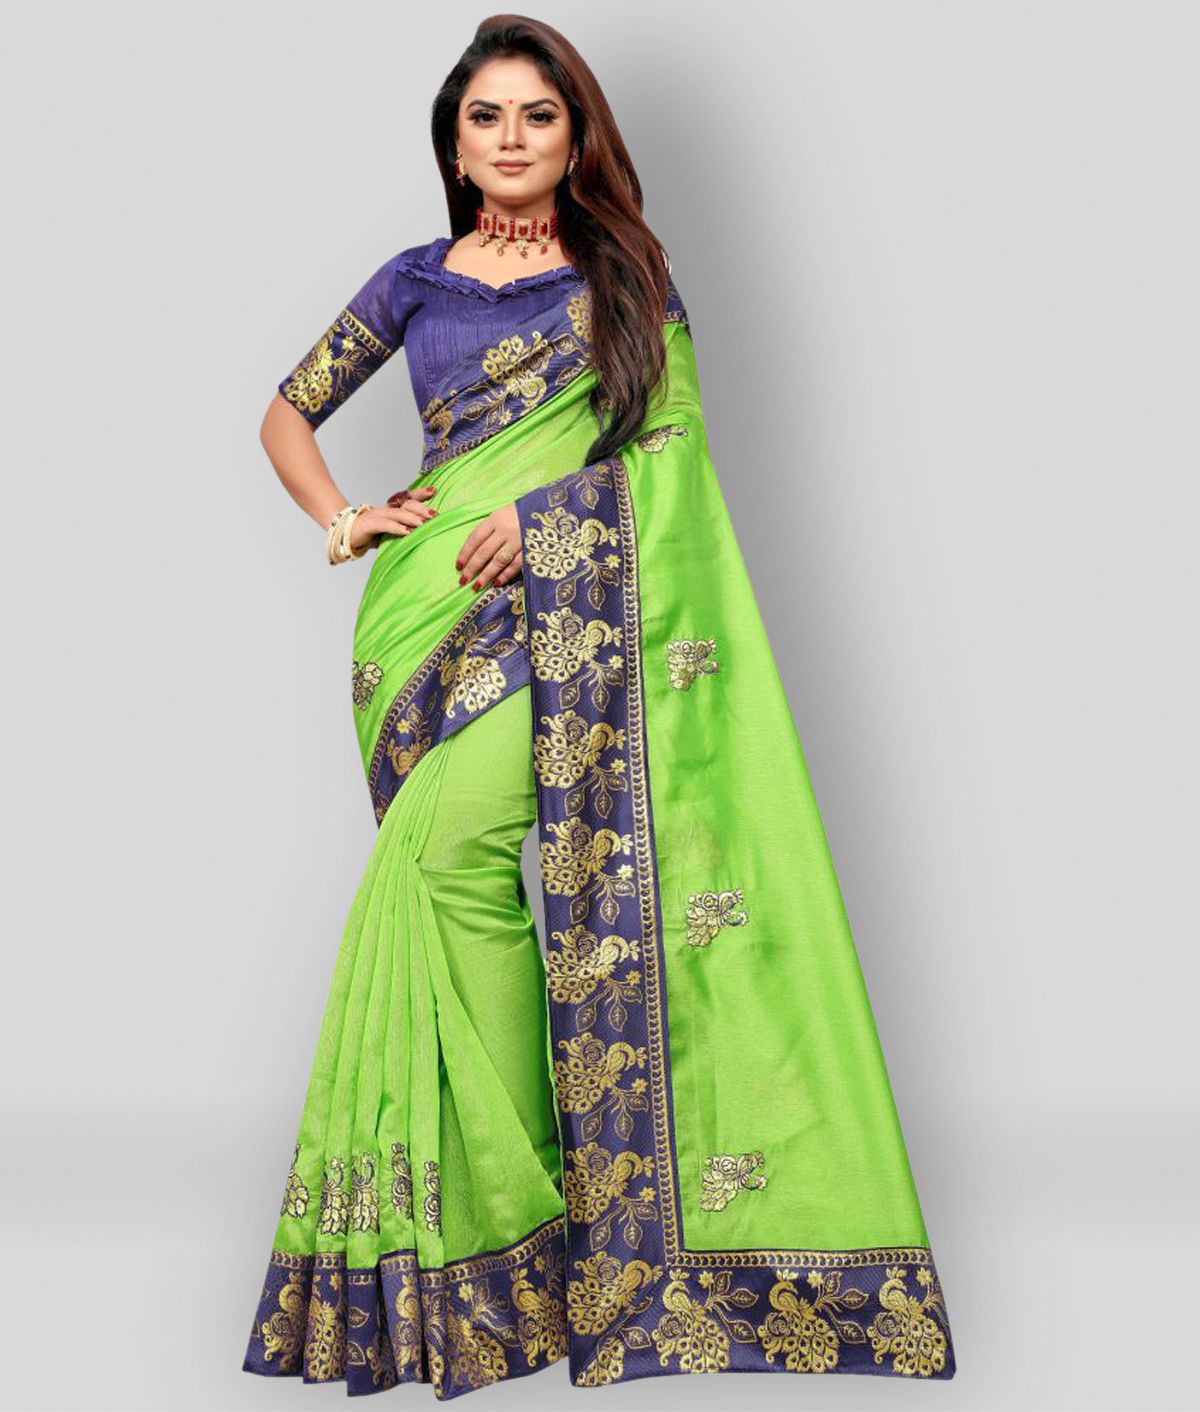     			Gazal Fashions - Green Cotton Saree With Blouse Piece ( Pack of 1 )